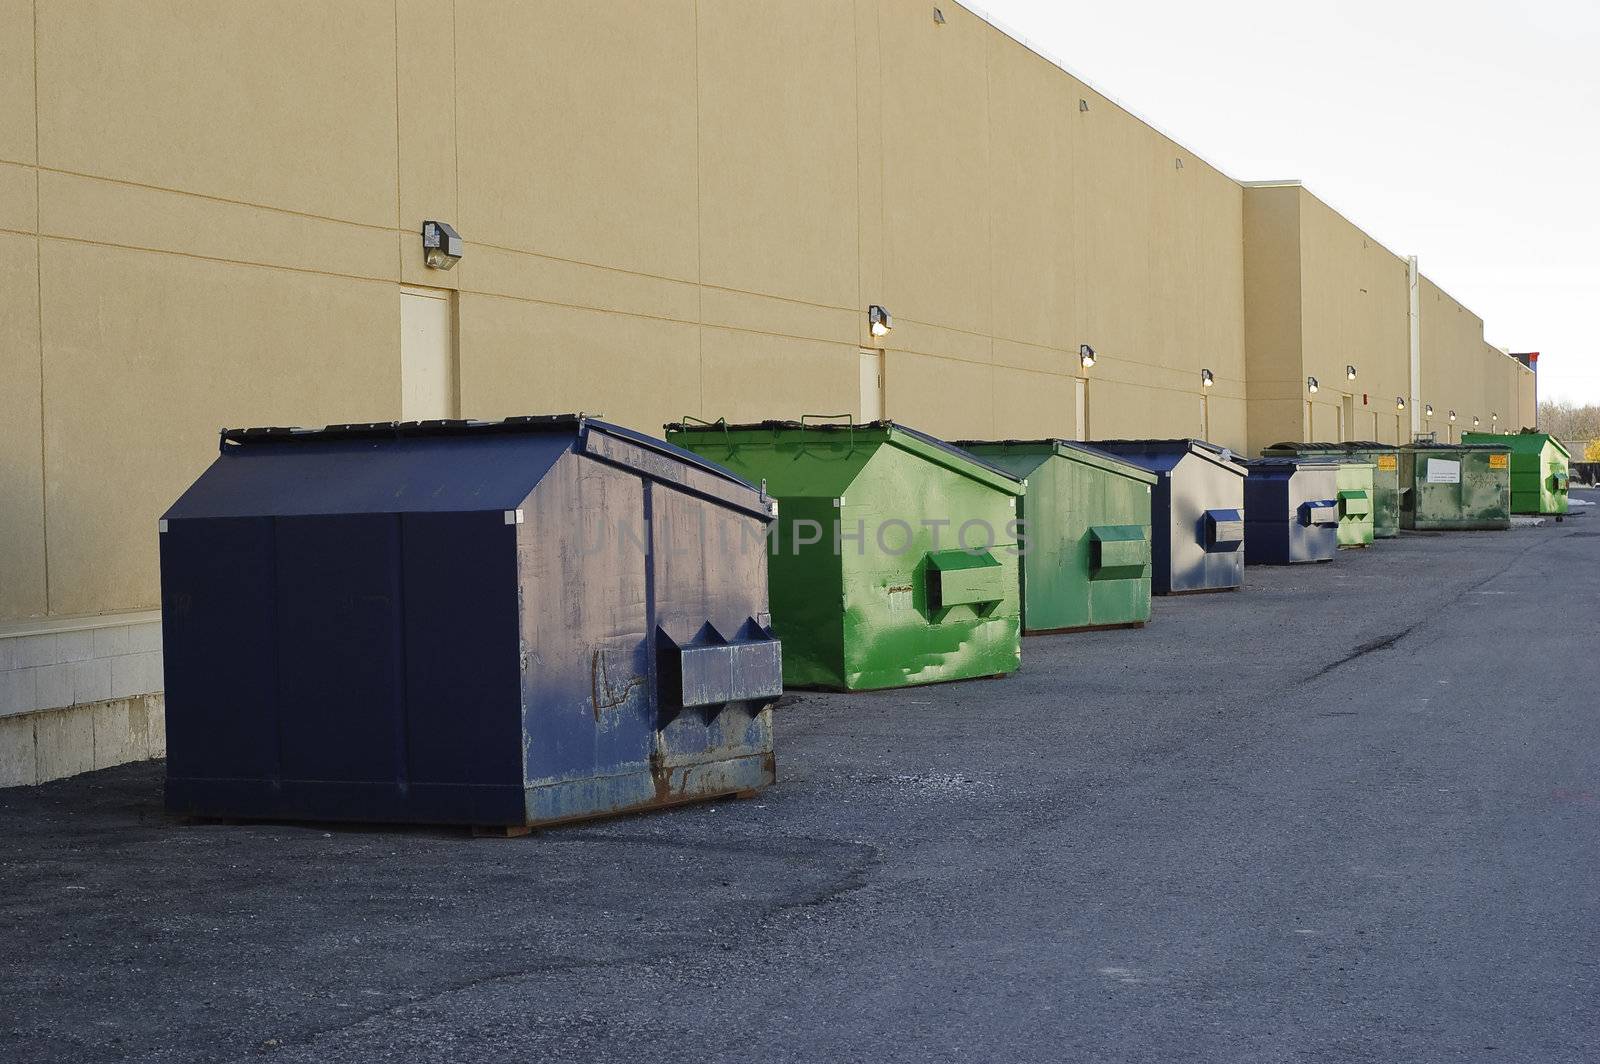 Blue and green industrial garbage bins lined up outside along commercial building